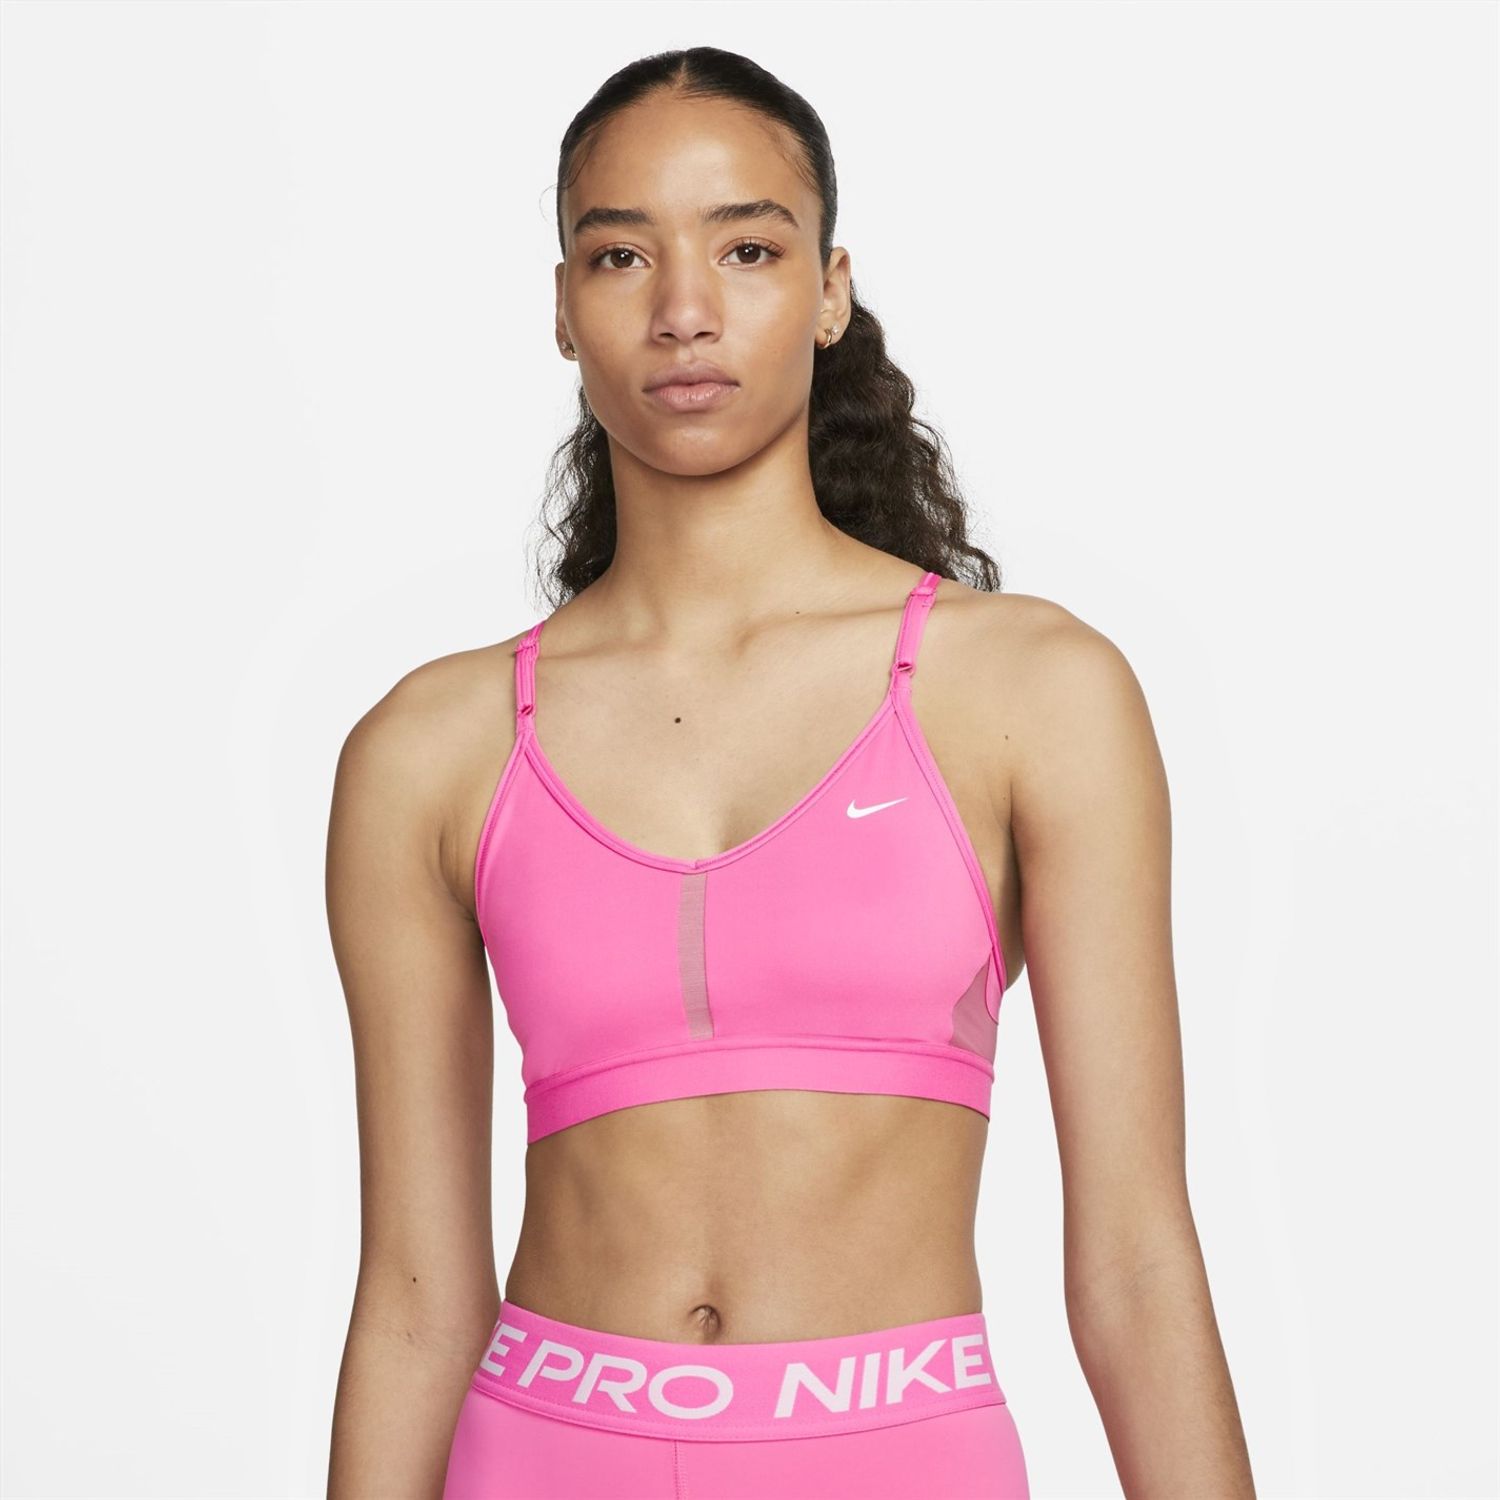 Pink Nike Womens Indy Light Support Logo Sports Bra - Get The Label